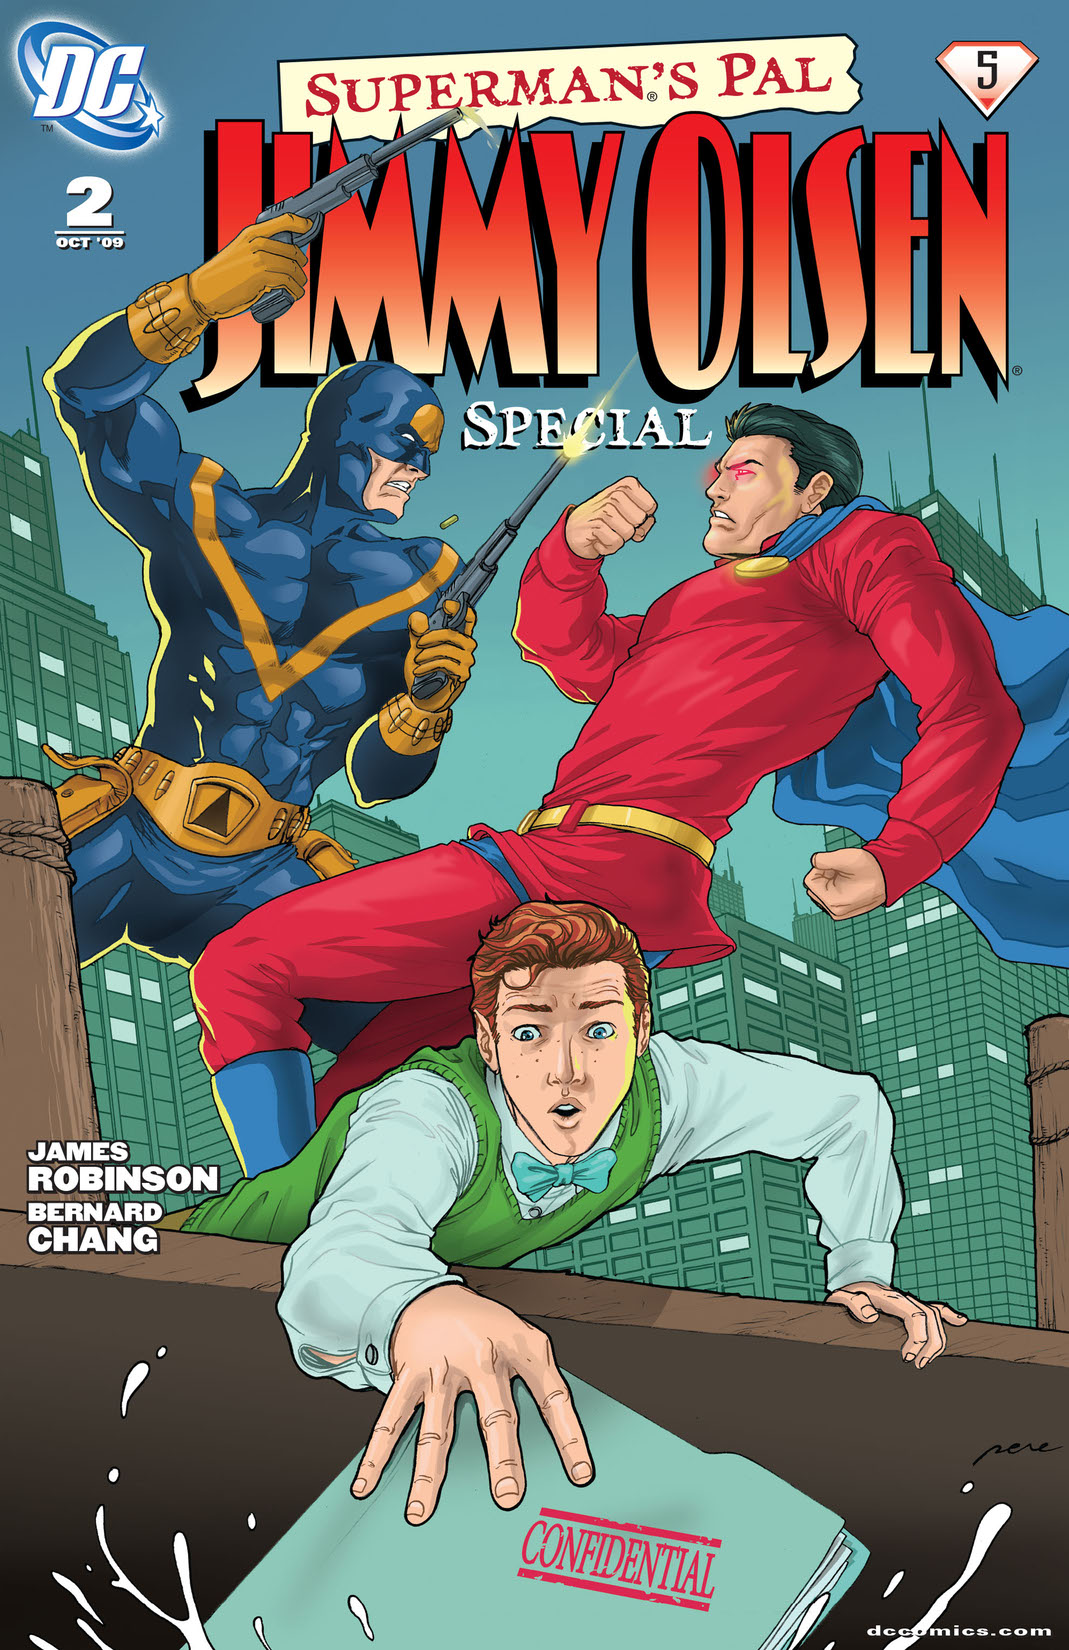 Superman's Pal, Jimmy Olsen Special #2 preview images